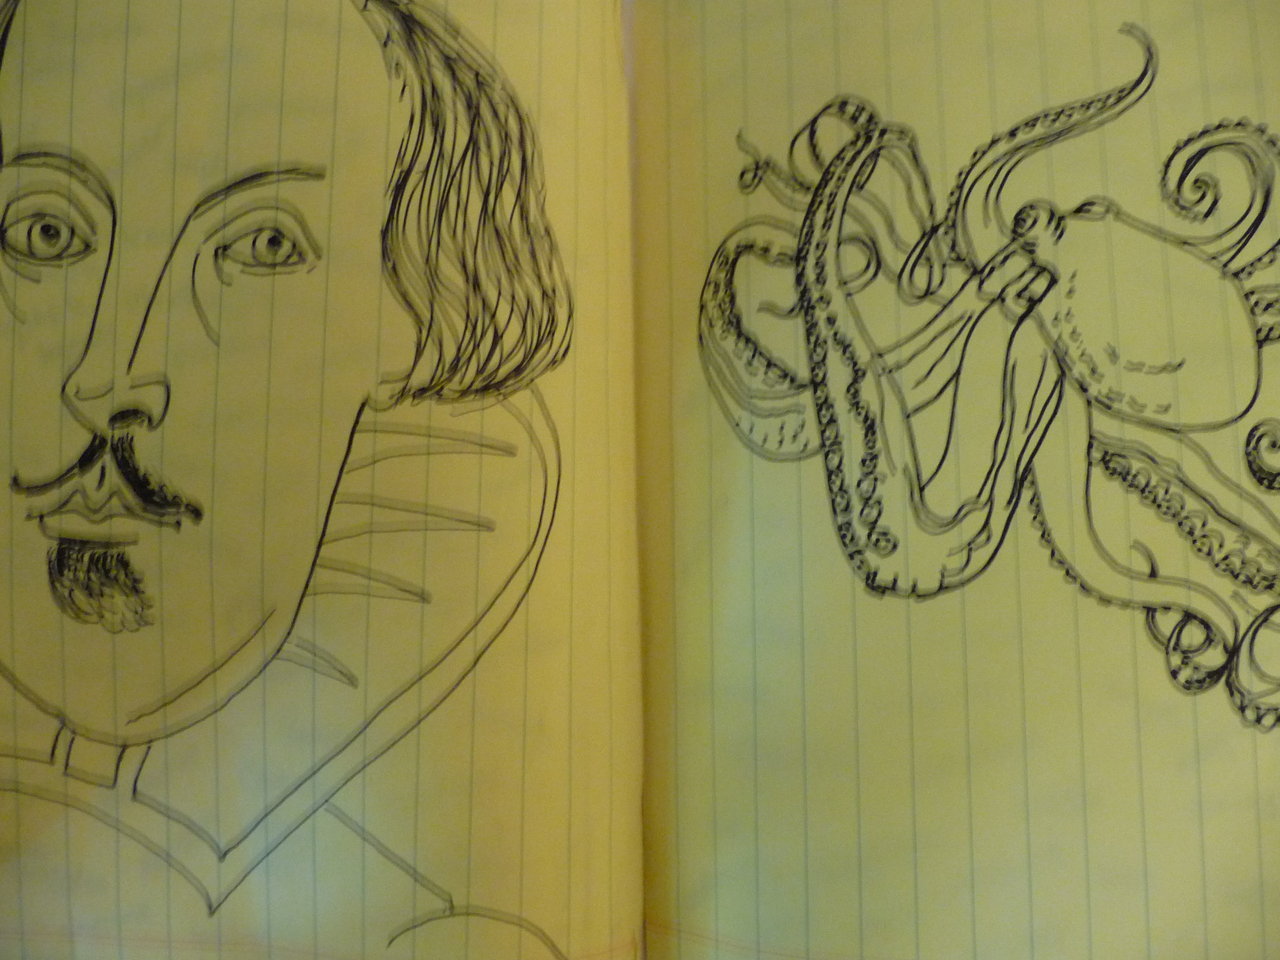 Shakespeare and octopus